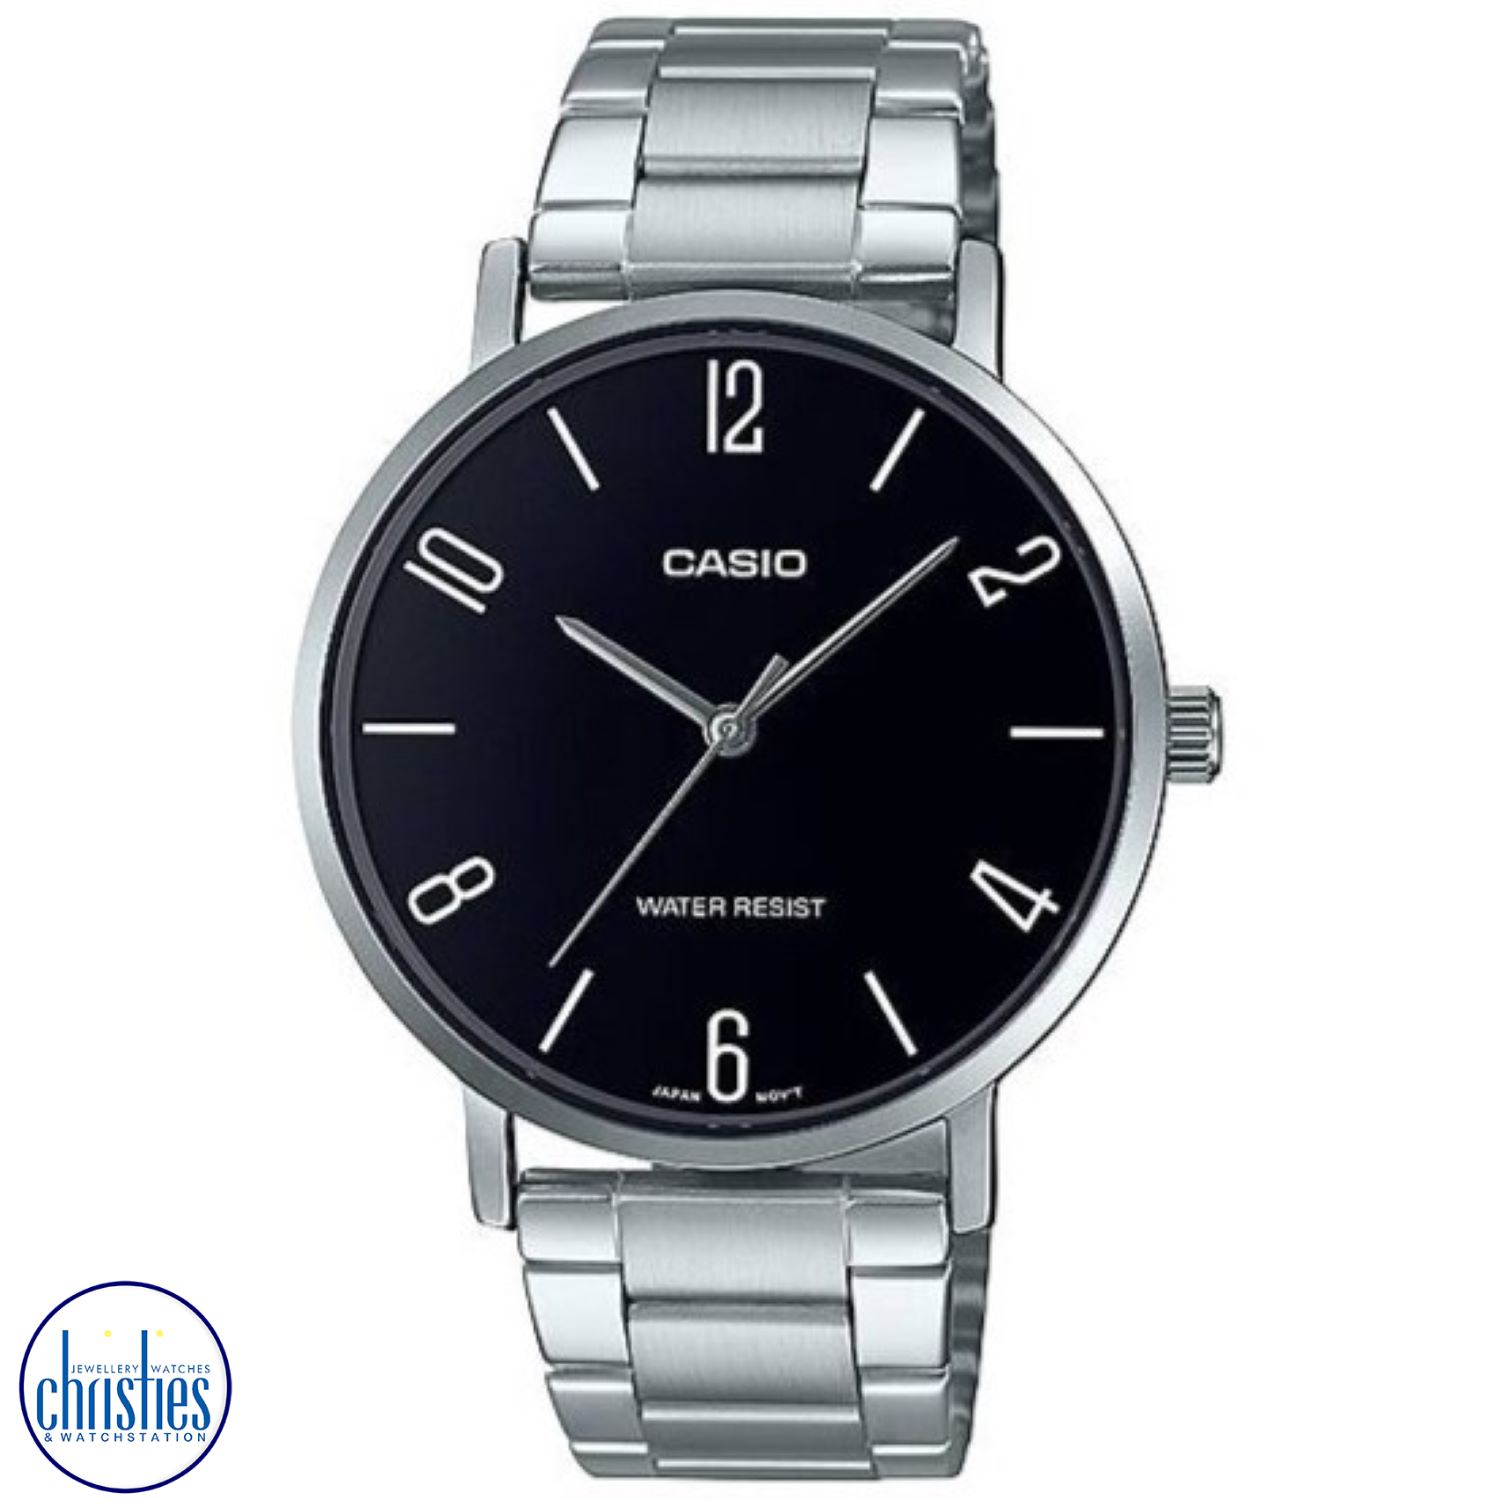 MTPVT01D-1B2 Casio Black Dial Stainless Steel Watch MTP-VT01D-1B2 Casio New Zealand and Auckland - Free Delivery - Afterpay, Laybuy and Zip  the easy way to pay - Cheap Casio Watches Auckland